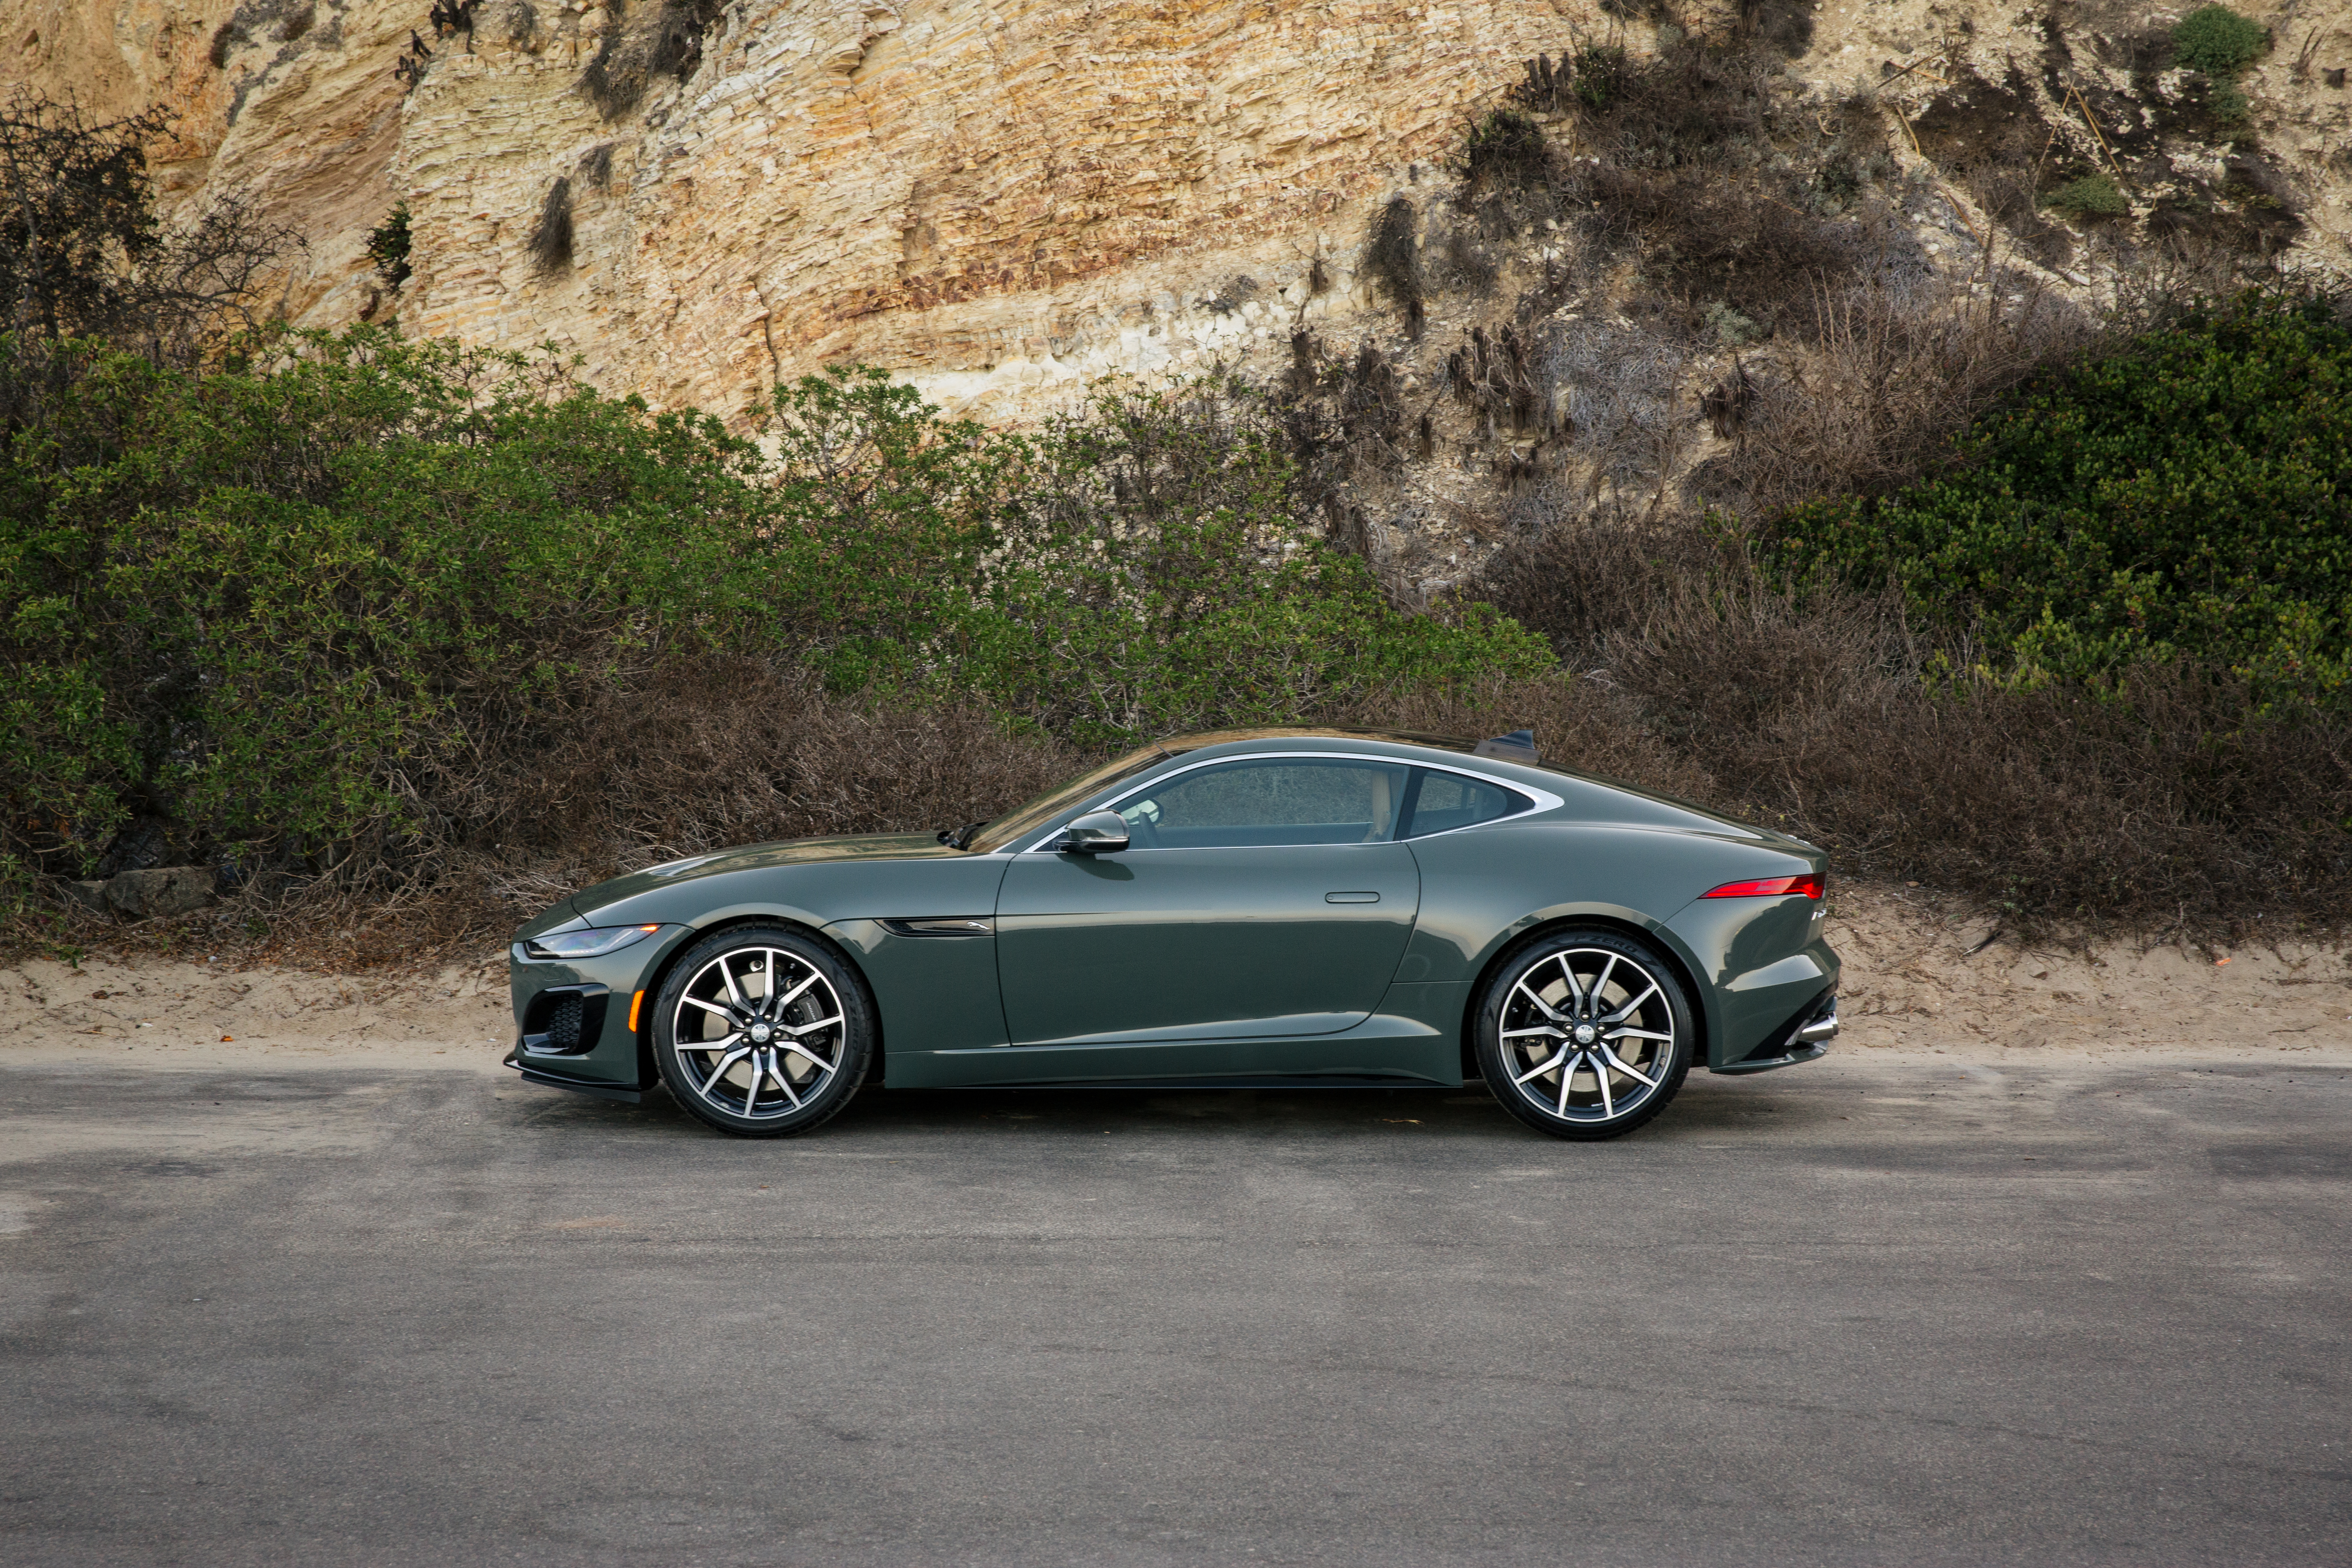  2019 2020 2021 Jaguar F Type Coupe features an all-new supercharged 3.0-liter V6 petrol engine, producing a stunning 302PS and 516Nm of torque.